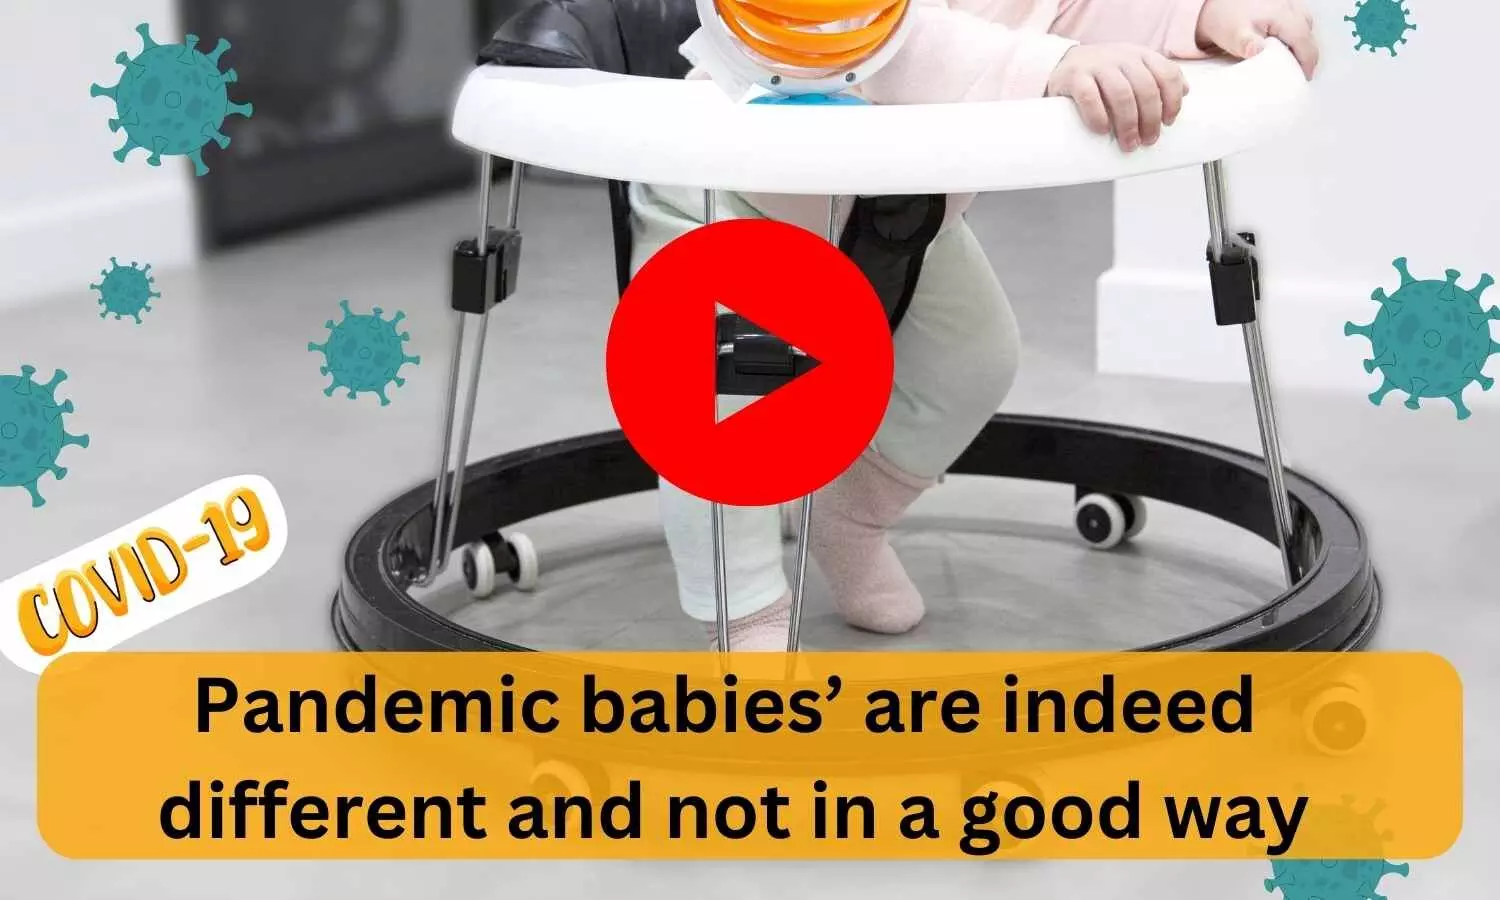 Pandemic babies are indeed different and not in a good way